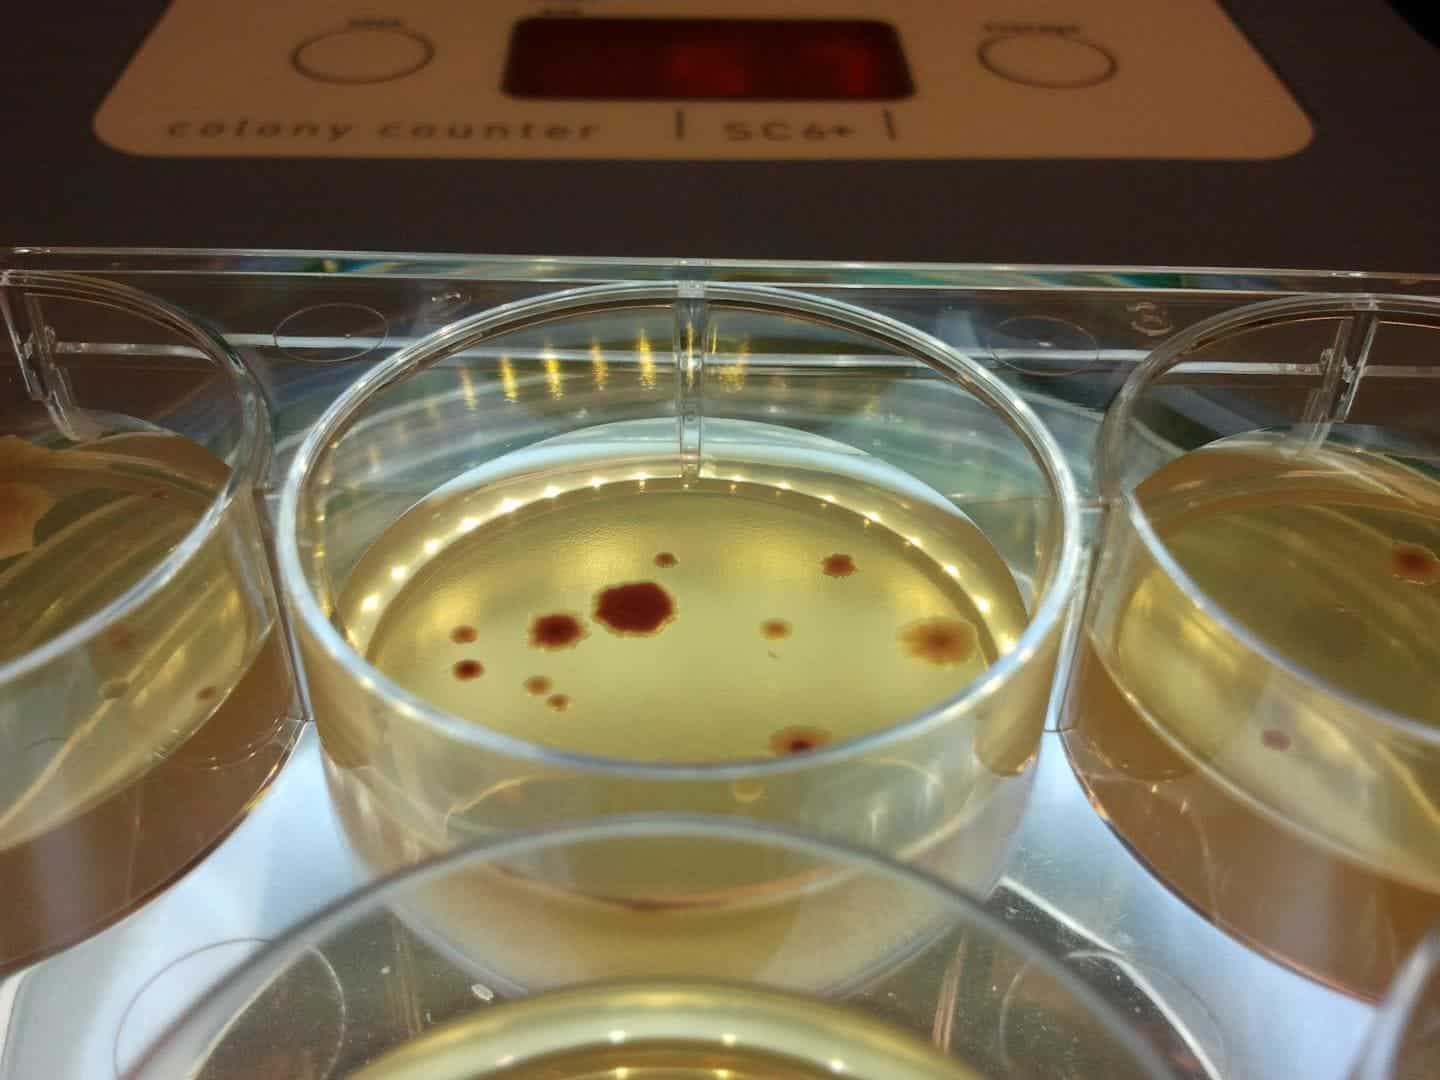 Antibiotic-resistant bacteria growing in the lab. Image credits: The University of Manchester.